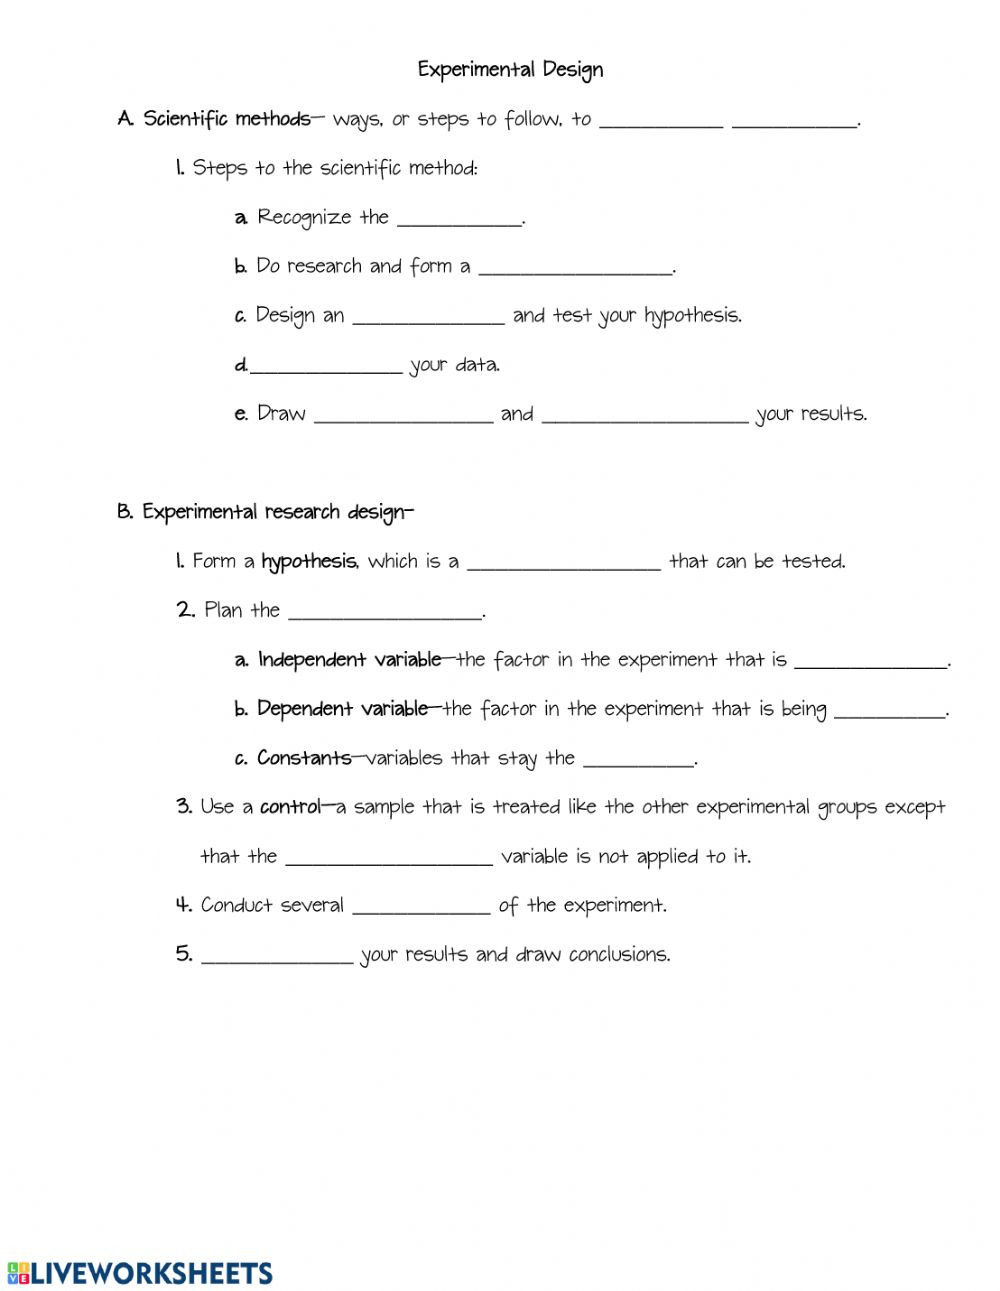 Experimental Design Guided Notes  Interactive Worksheet